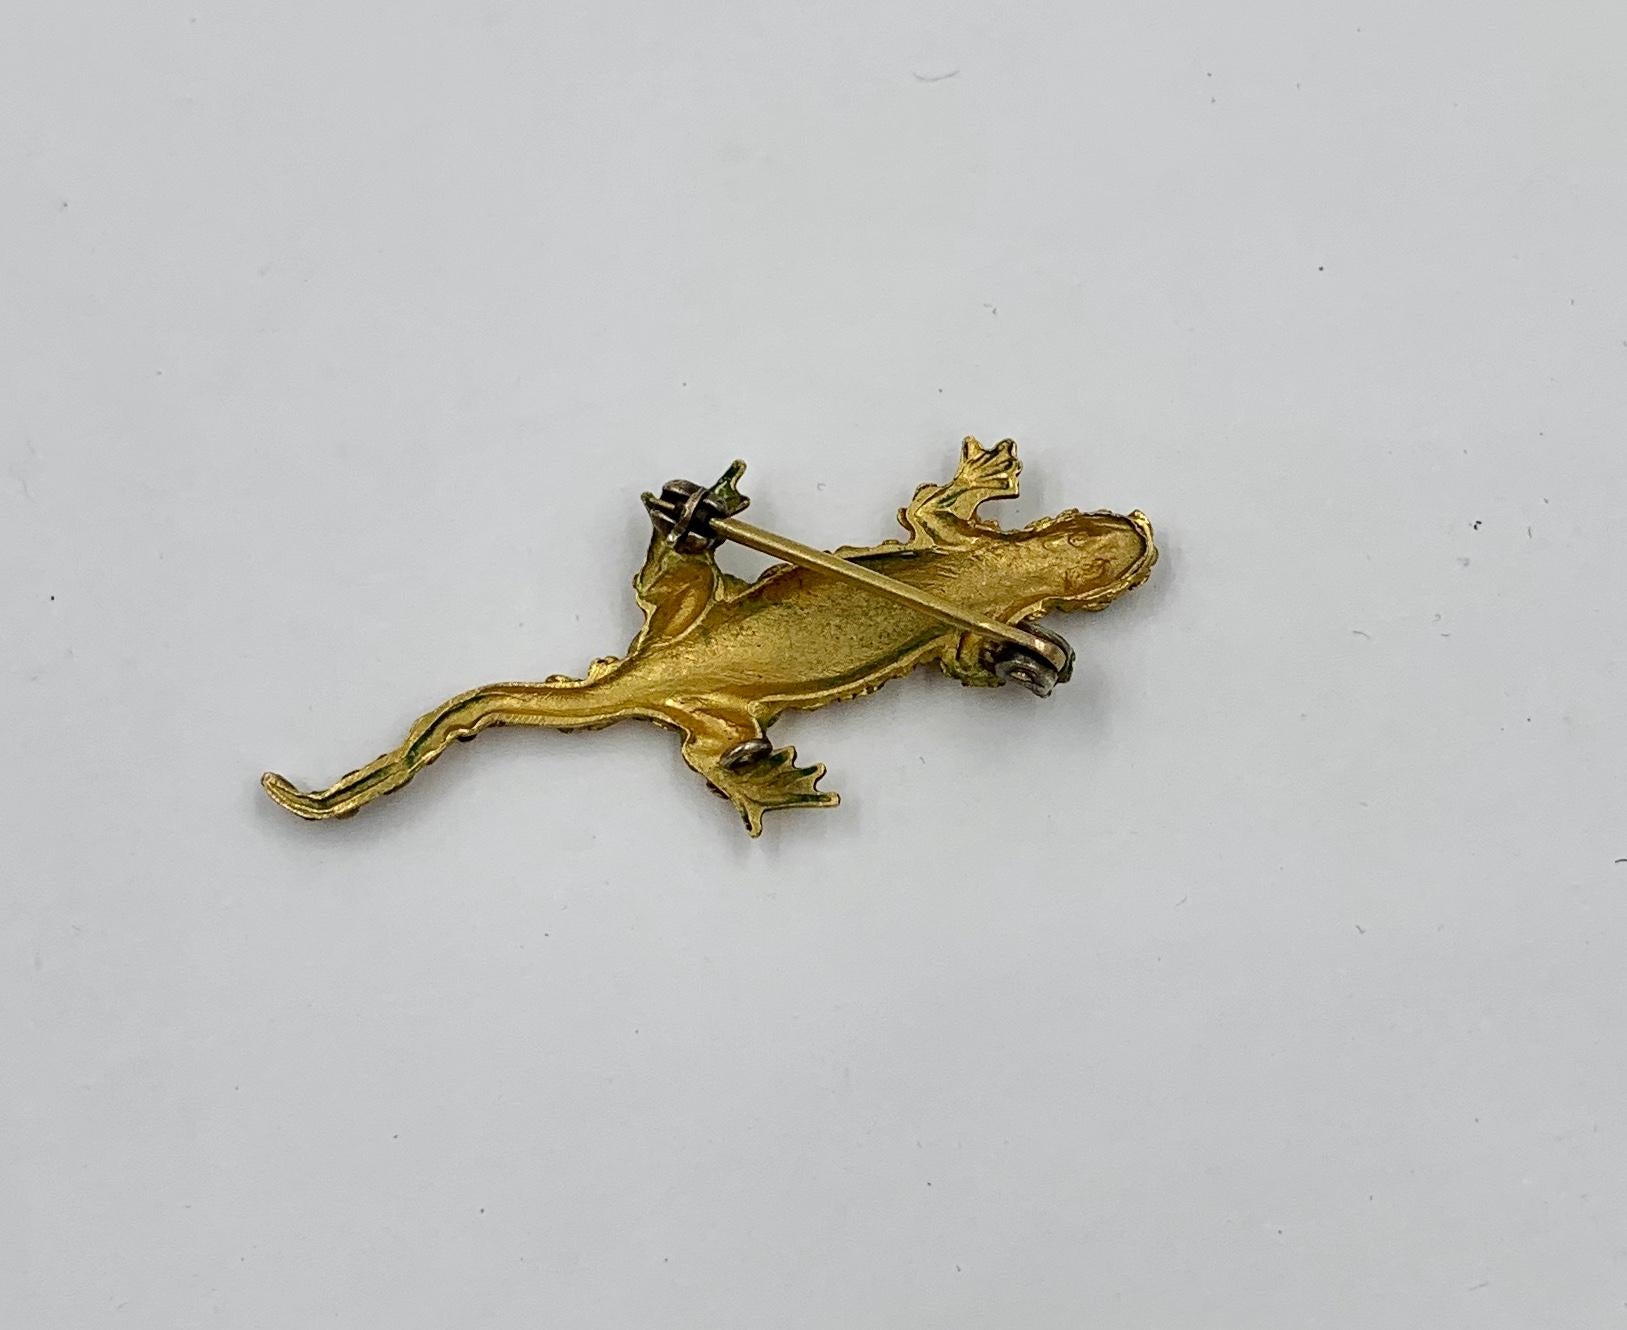 Emerald Nugget Gold Lizard Gecko Brooch Pin Retro Mid-Century Modernist In Good Condition For Sale In New York, NY